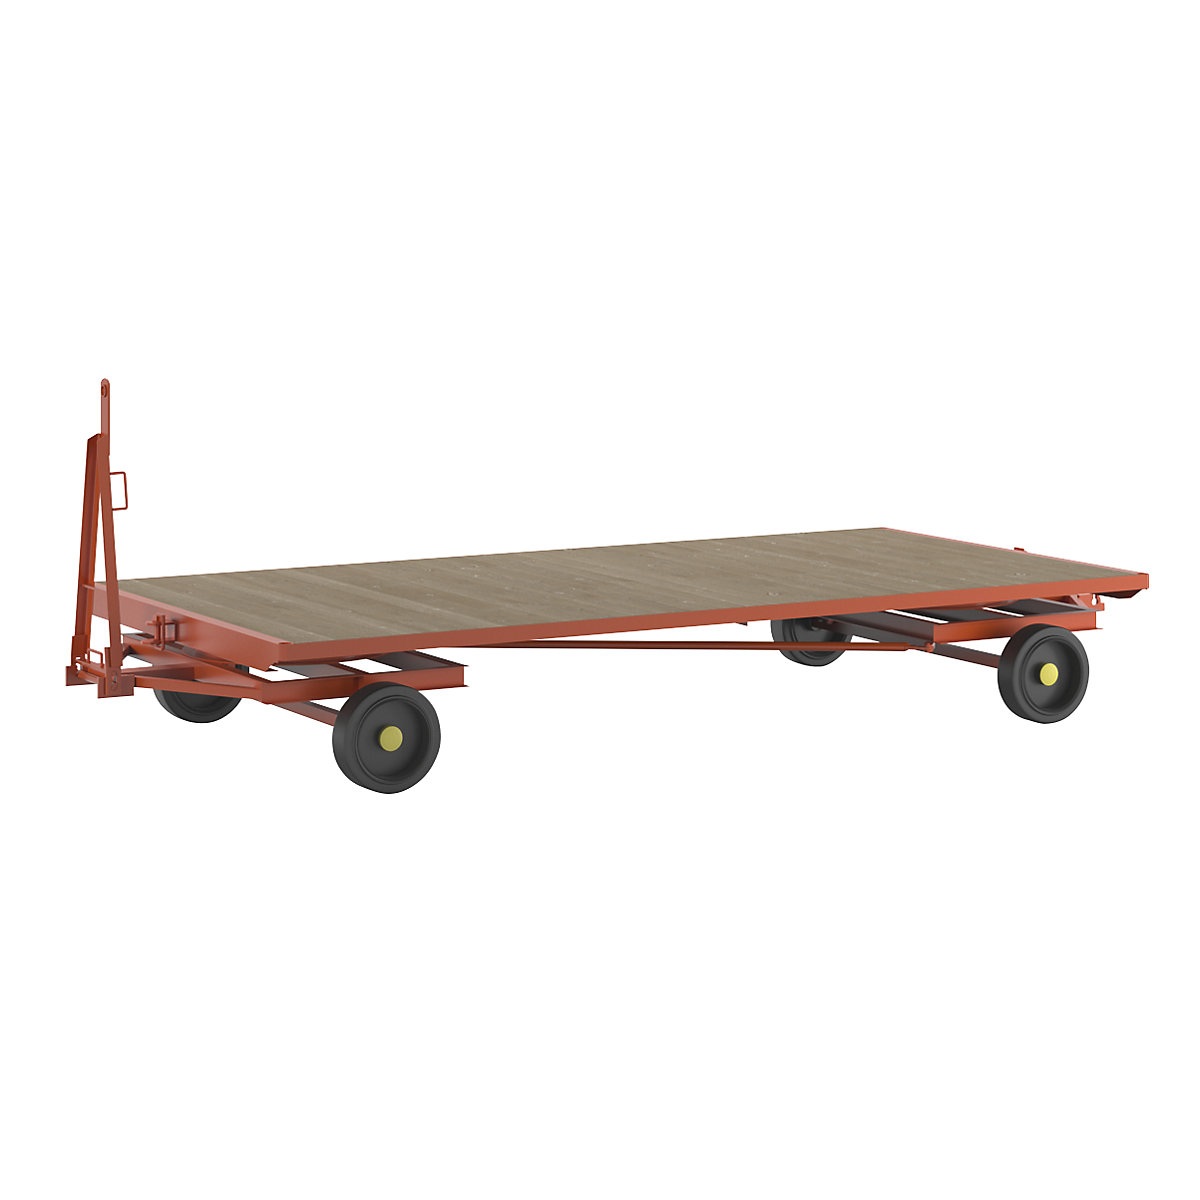 Trailer, 4-wheel double turntable steering, max. load 5 t, platform 4.0 x 2.0 m, solid rubber tyres-2